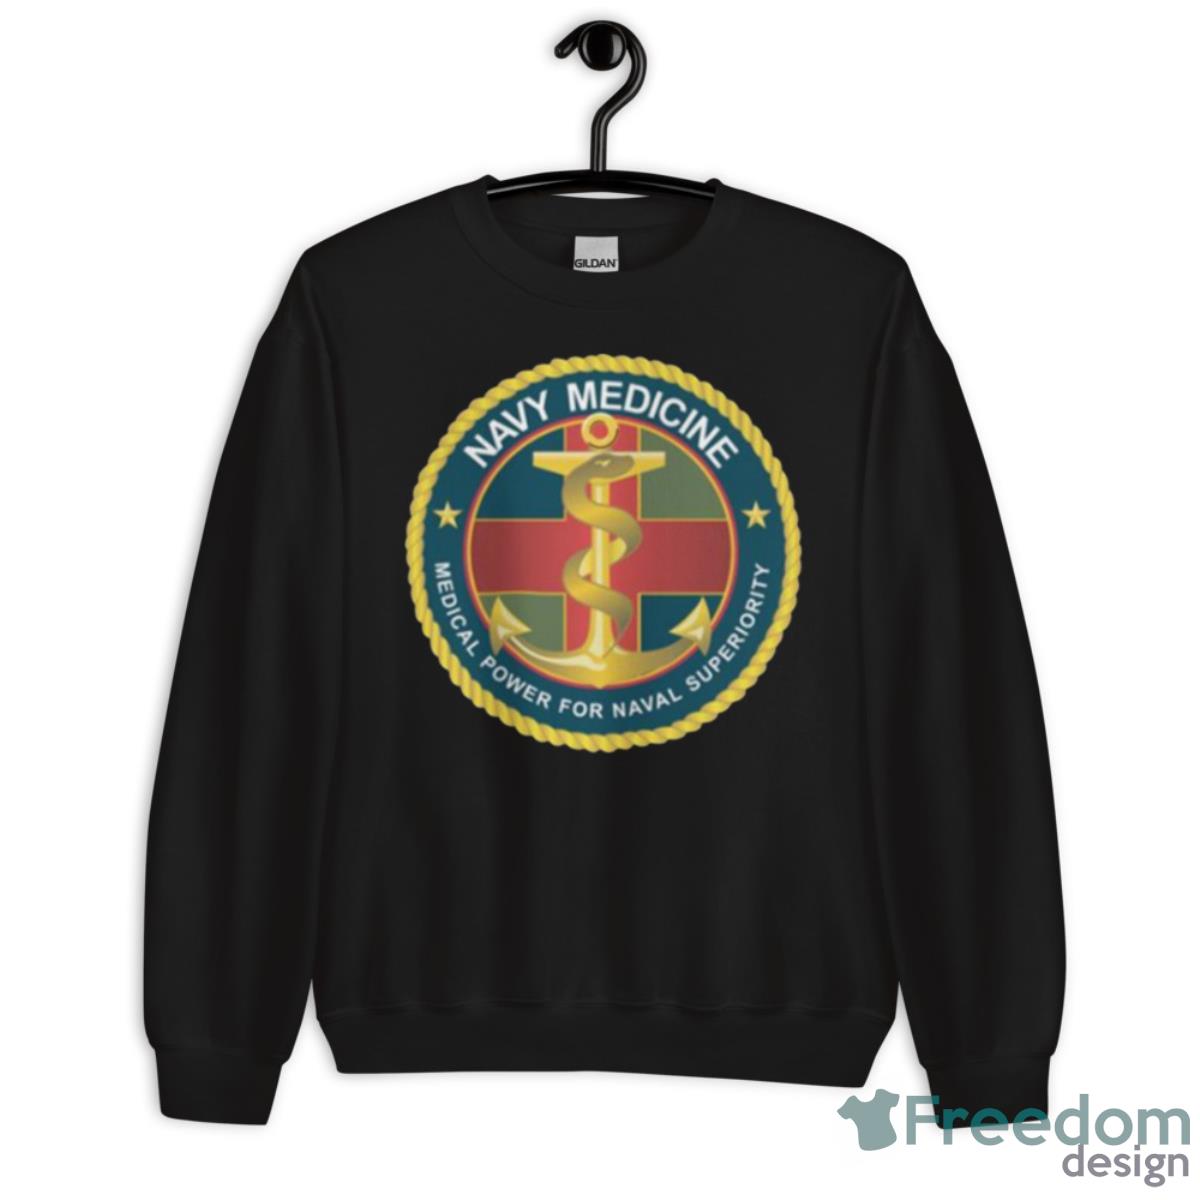 Navy Medicine Medical Power For Naval Superiority X 300 Shirt